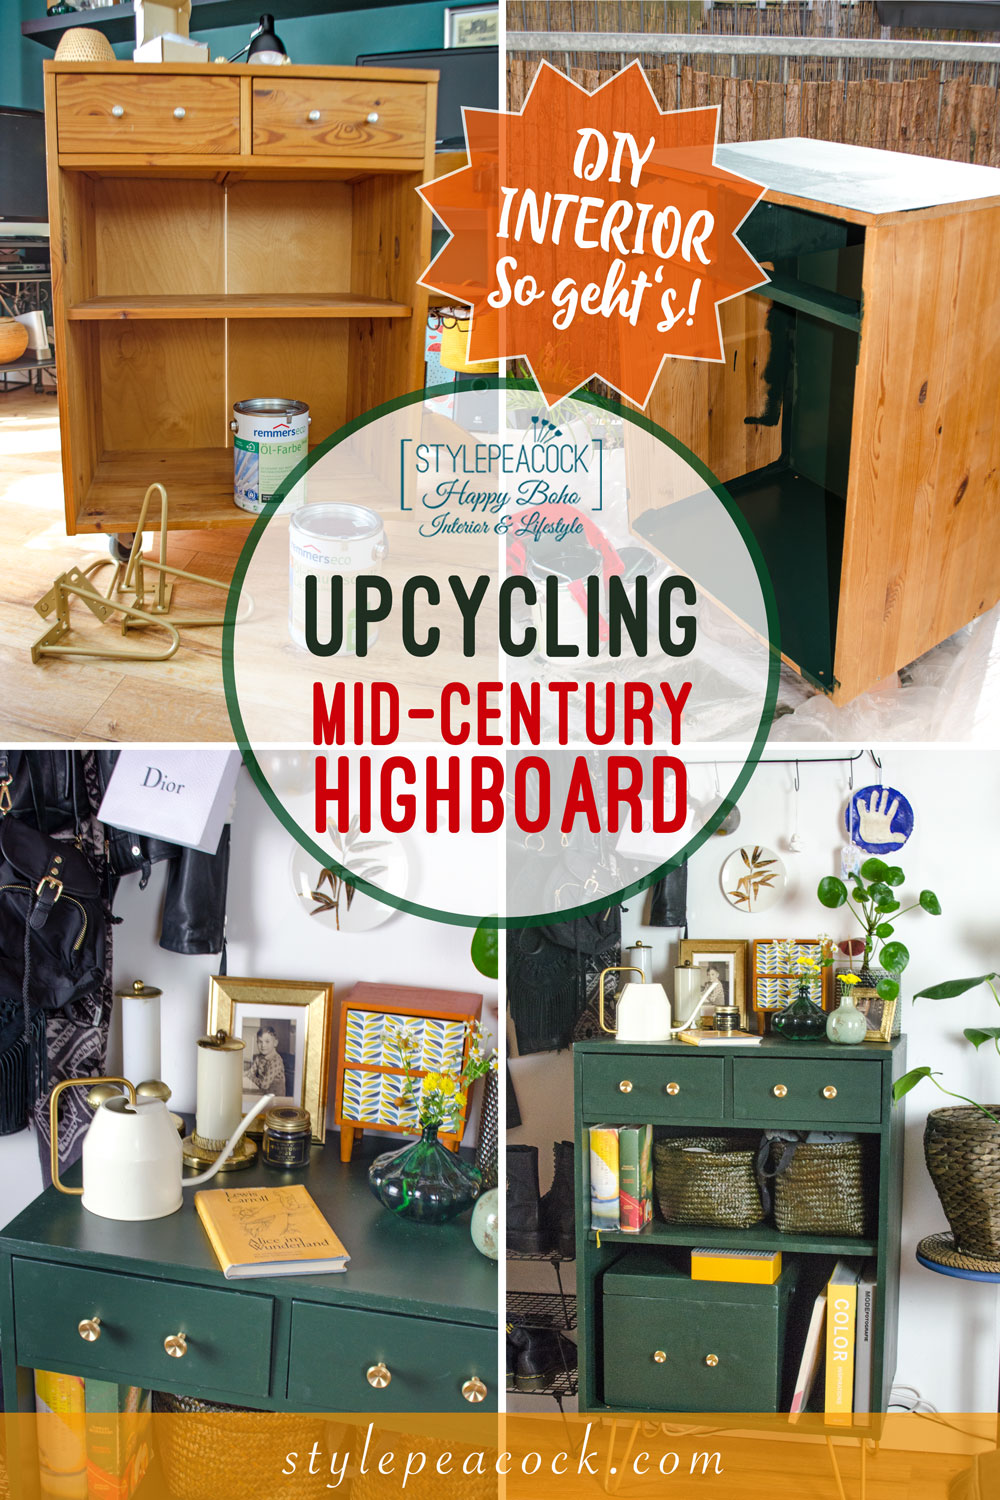 INTERIOR UPCYCLING MID-CENTURY HIGHBOARD DIY mit Remmers [eco]| (anzeige)